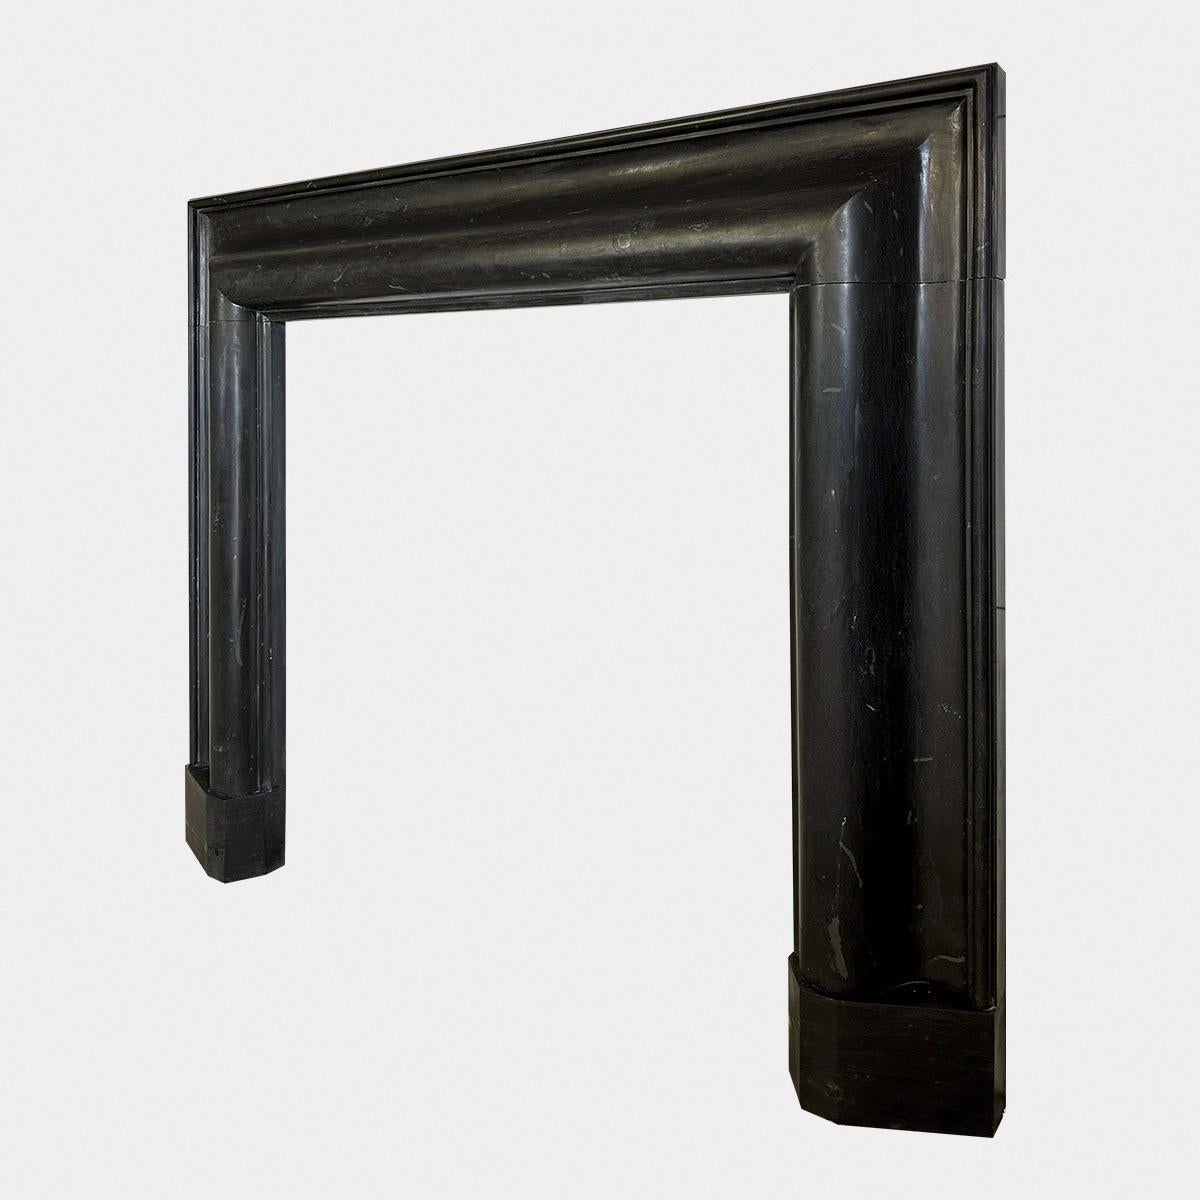 A large framed black Basalt stone bolection fireplace surround, with wide bolection moulding profile. Stood on shaped foot blockings. Almost jet black in colour with small inclusions as Basalt is a Volcanic rock. Incredibly hard and durable